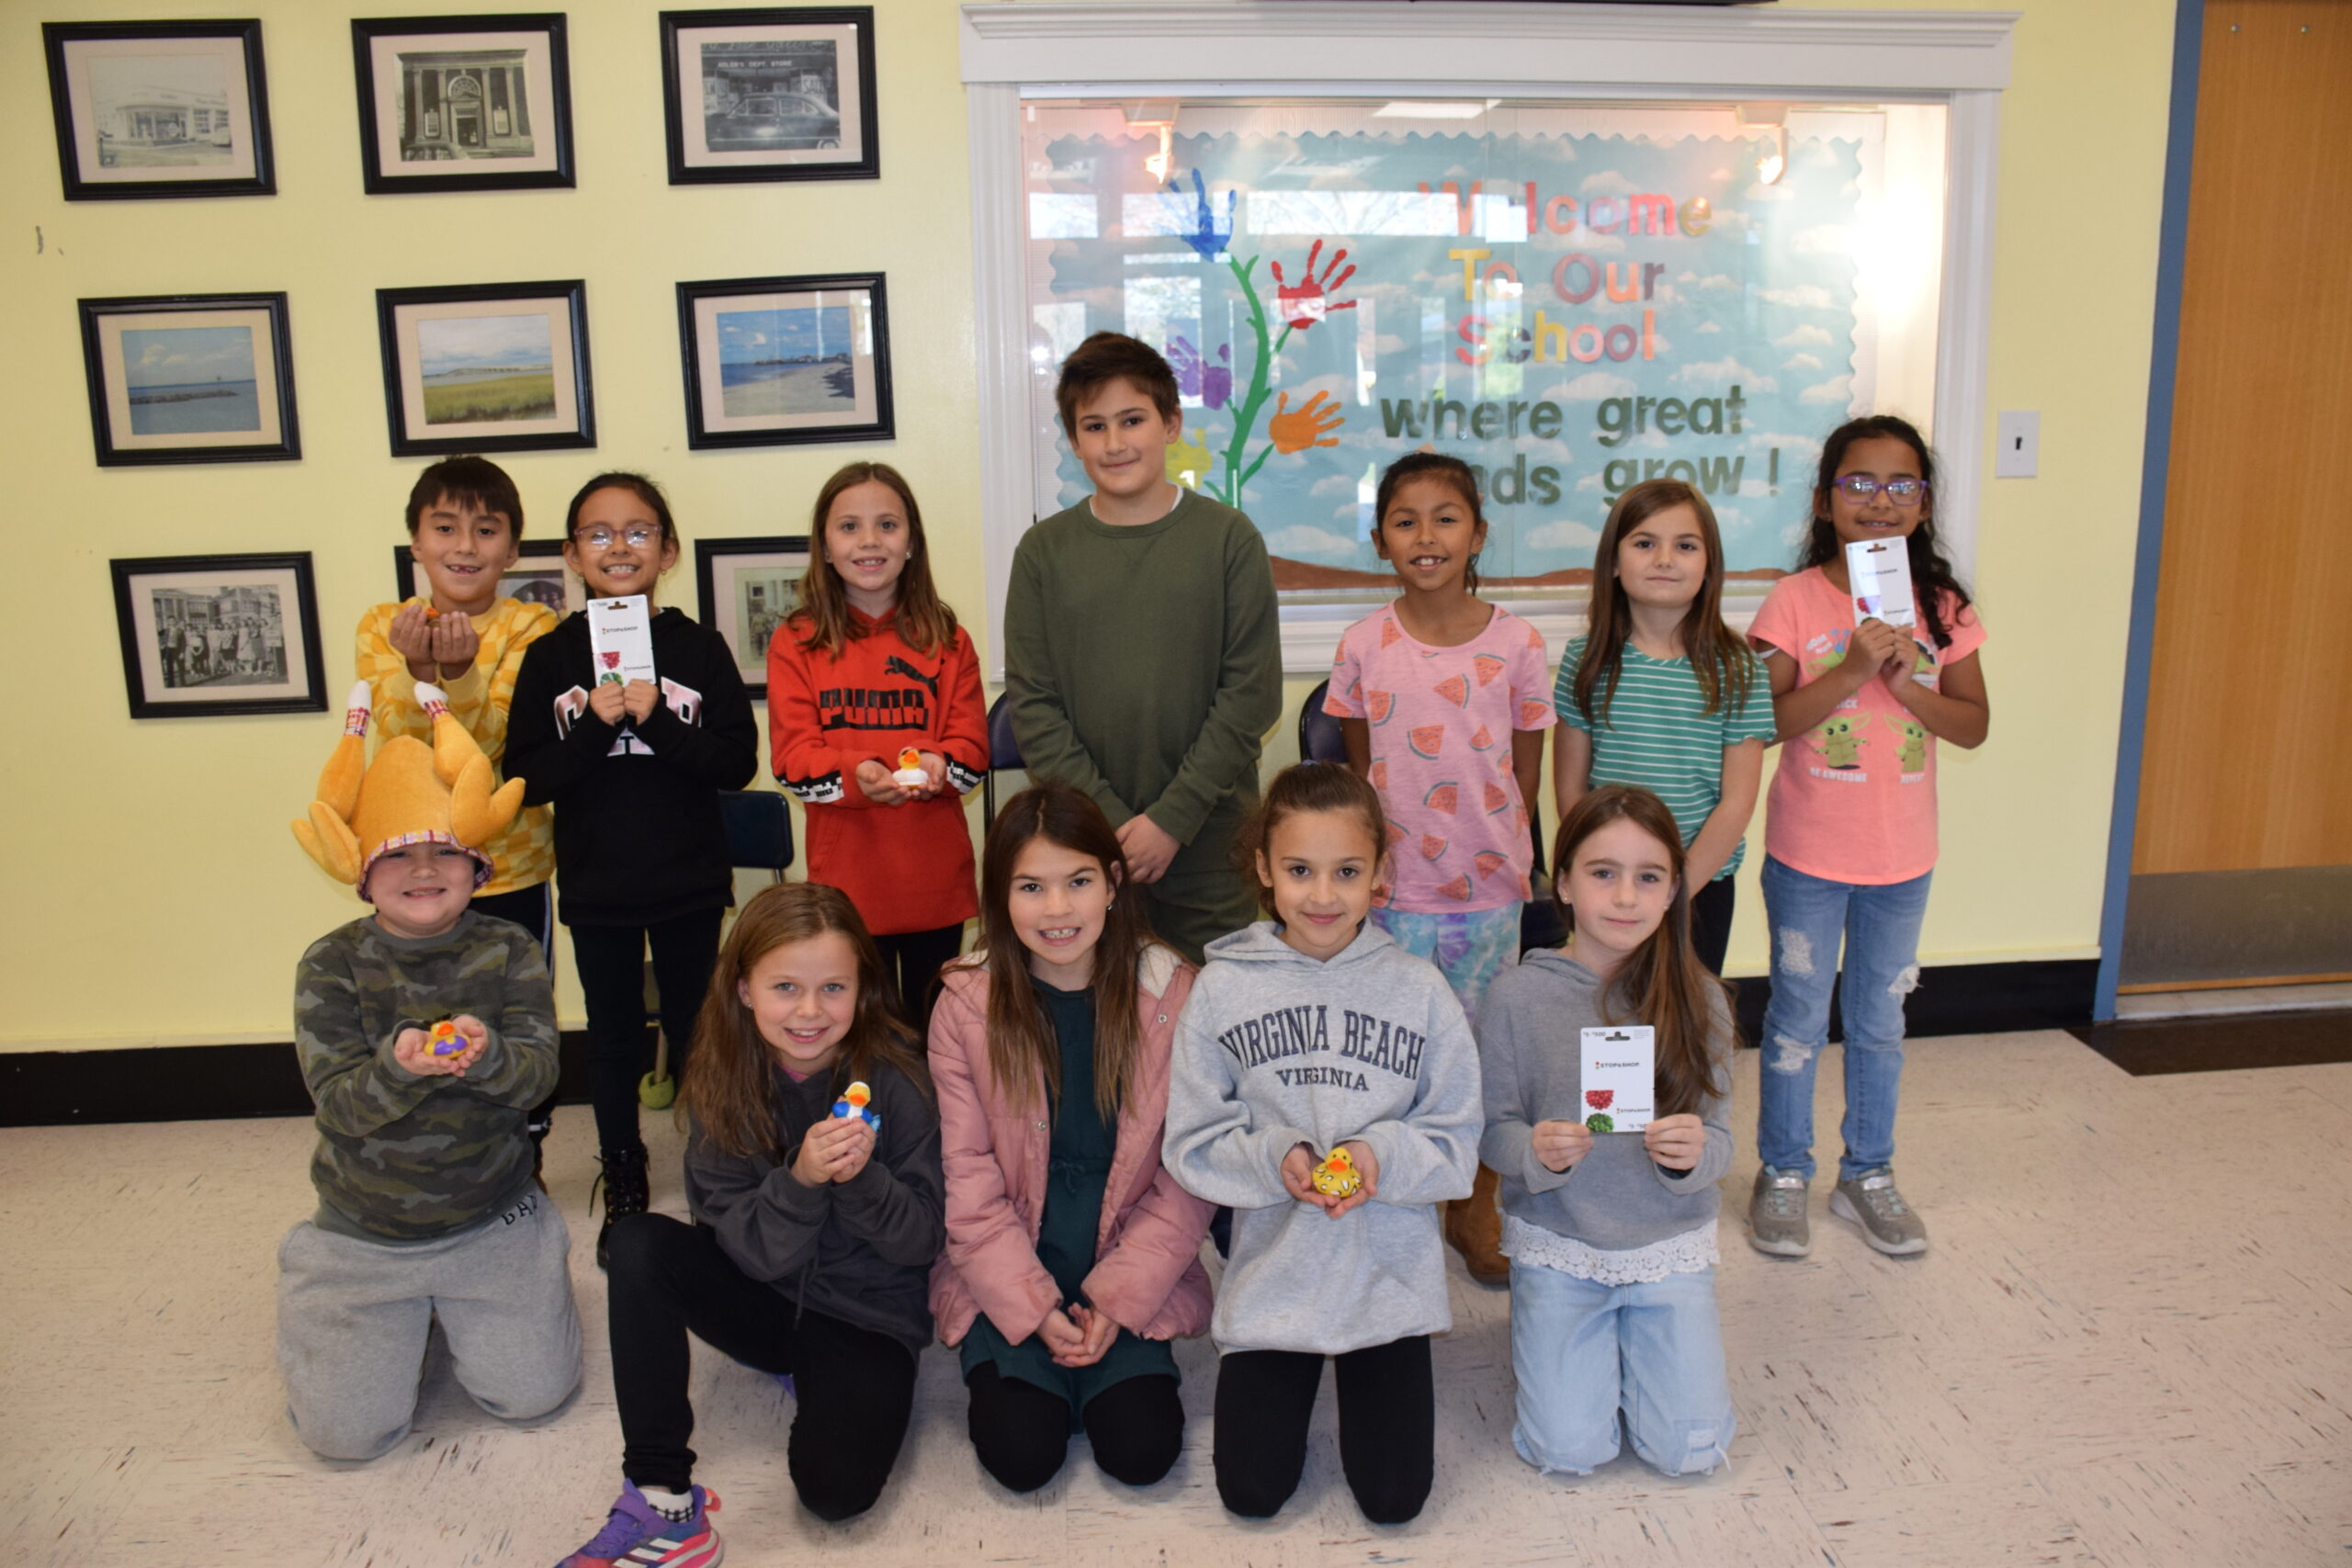 The members of the Hampton Bays Elementary School service organization K-Kids recently donated $200 toward their school’s PTA Thanksgiving fundraiser that provides gift cards for families in need to purchase Thanksgiving dinners. They raised the funds by selling rubber ducks during their lunch period to peers and teachers. COURTESY HAMPTON BAYS SCHOOL DISTRICT